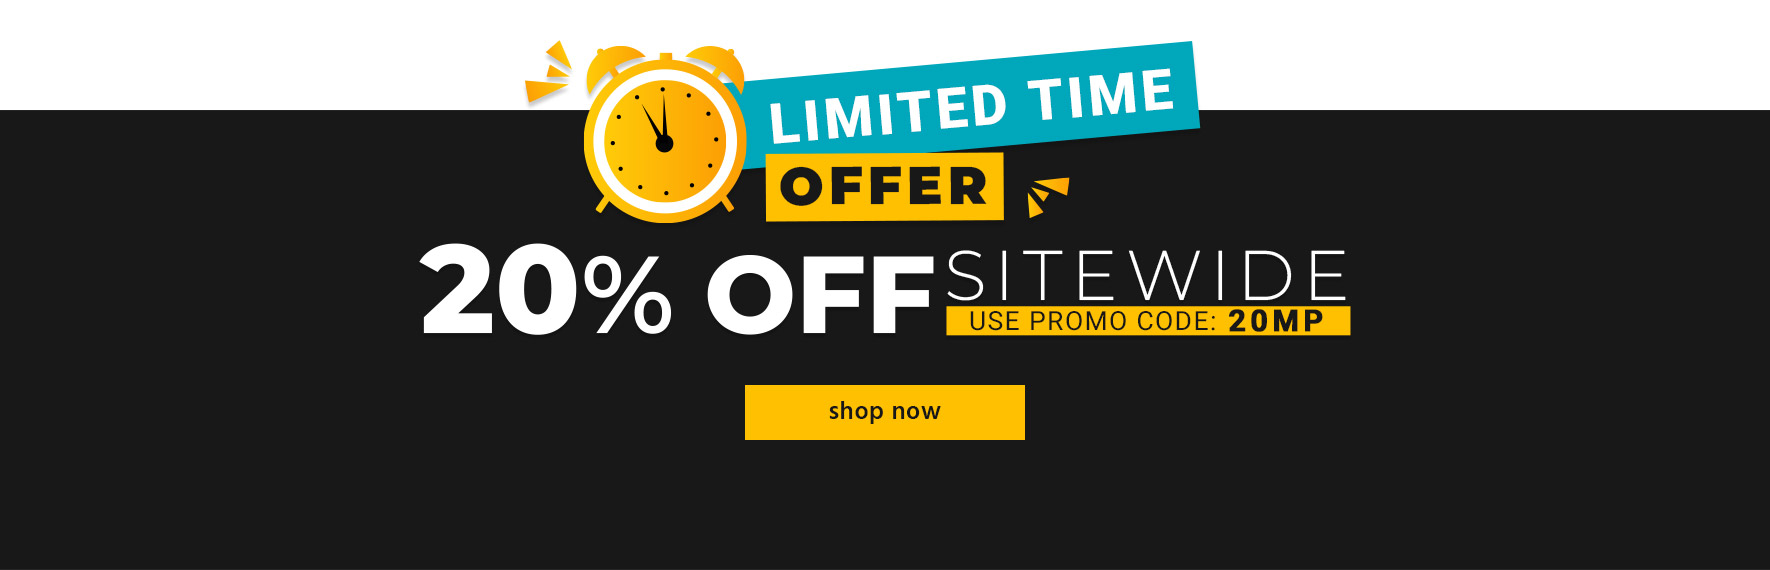 20% off Sitewide Use promo code: 20MP Limited Time Offer  Shop Now